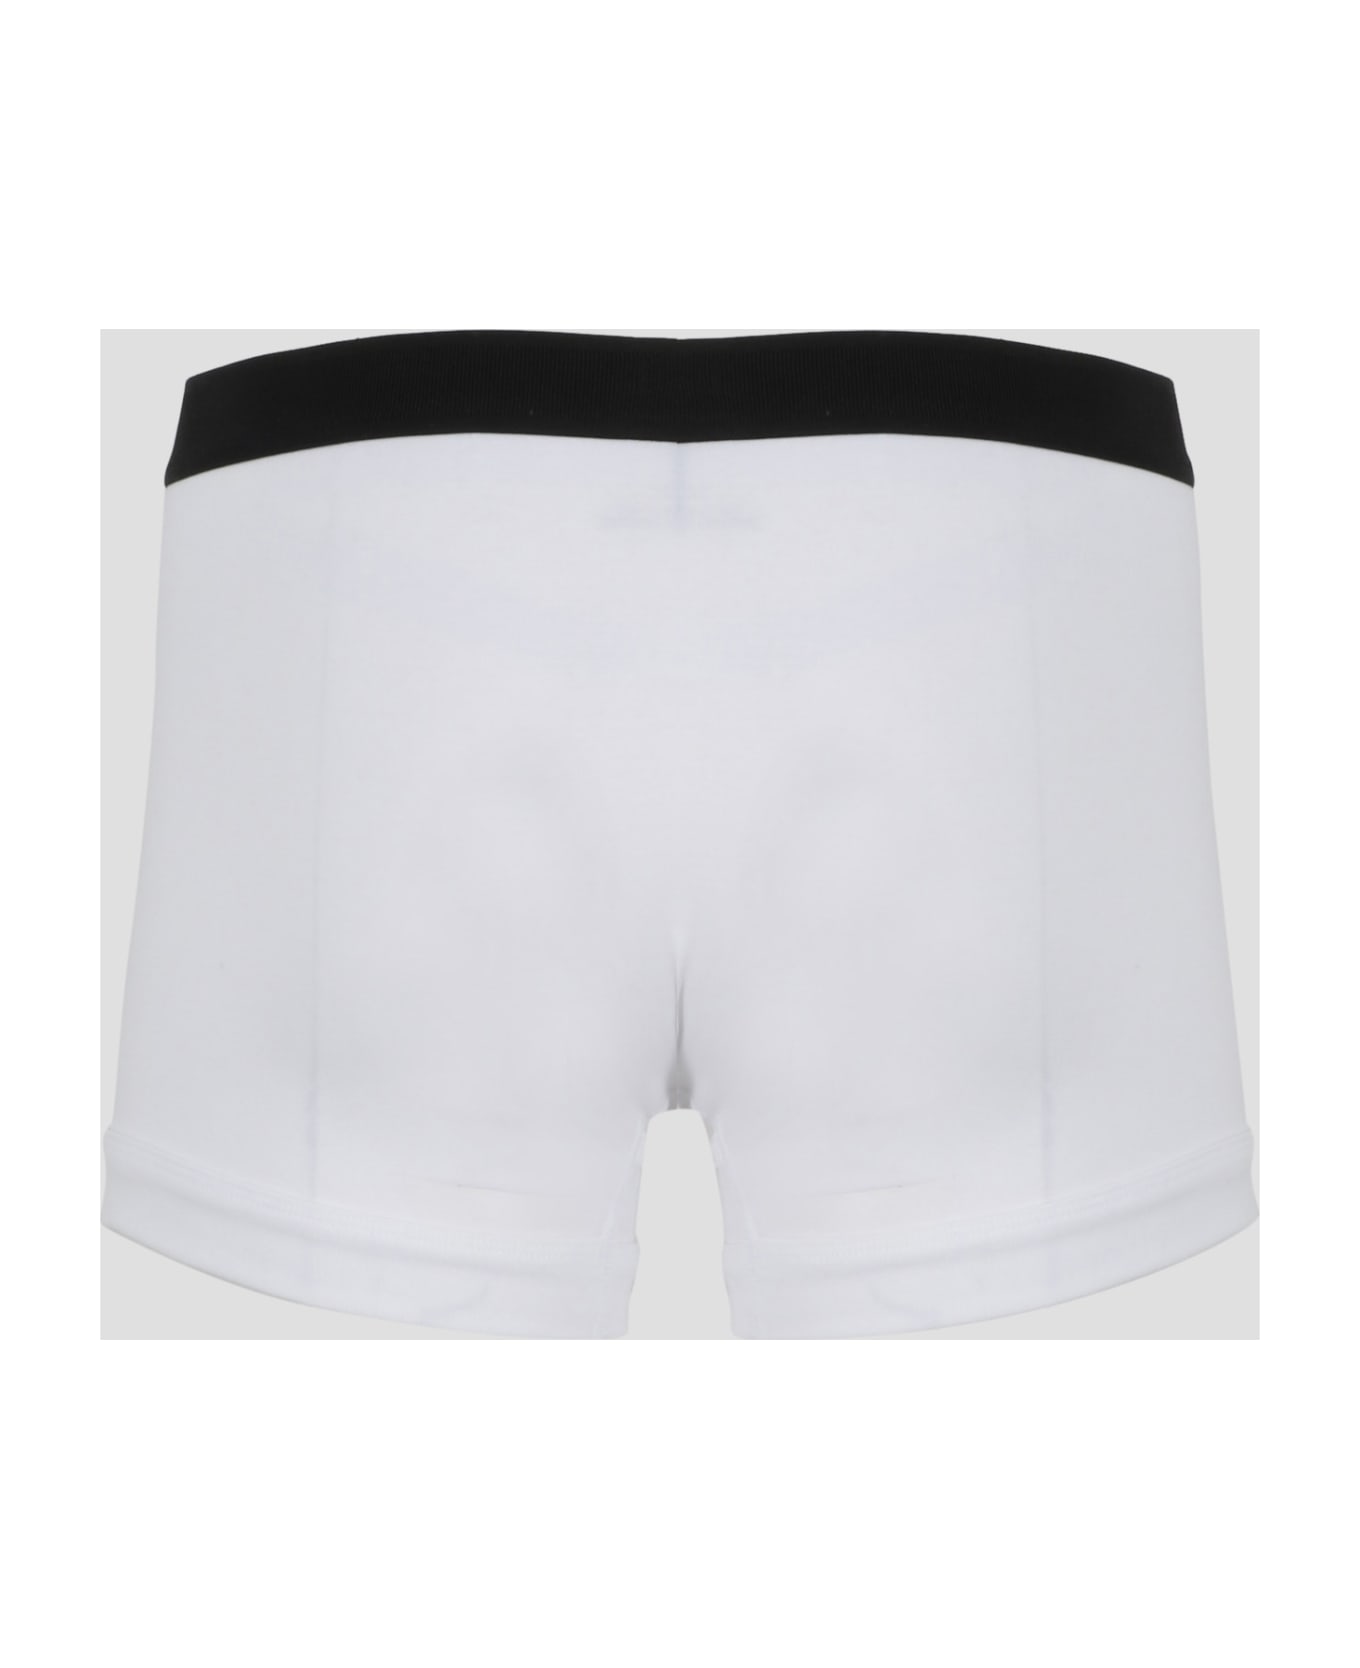 Tom Ford Intimo - White